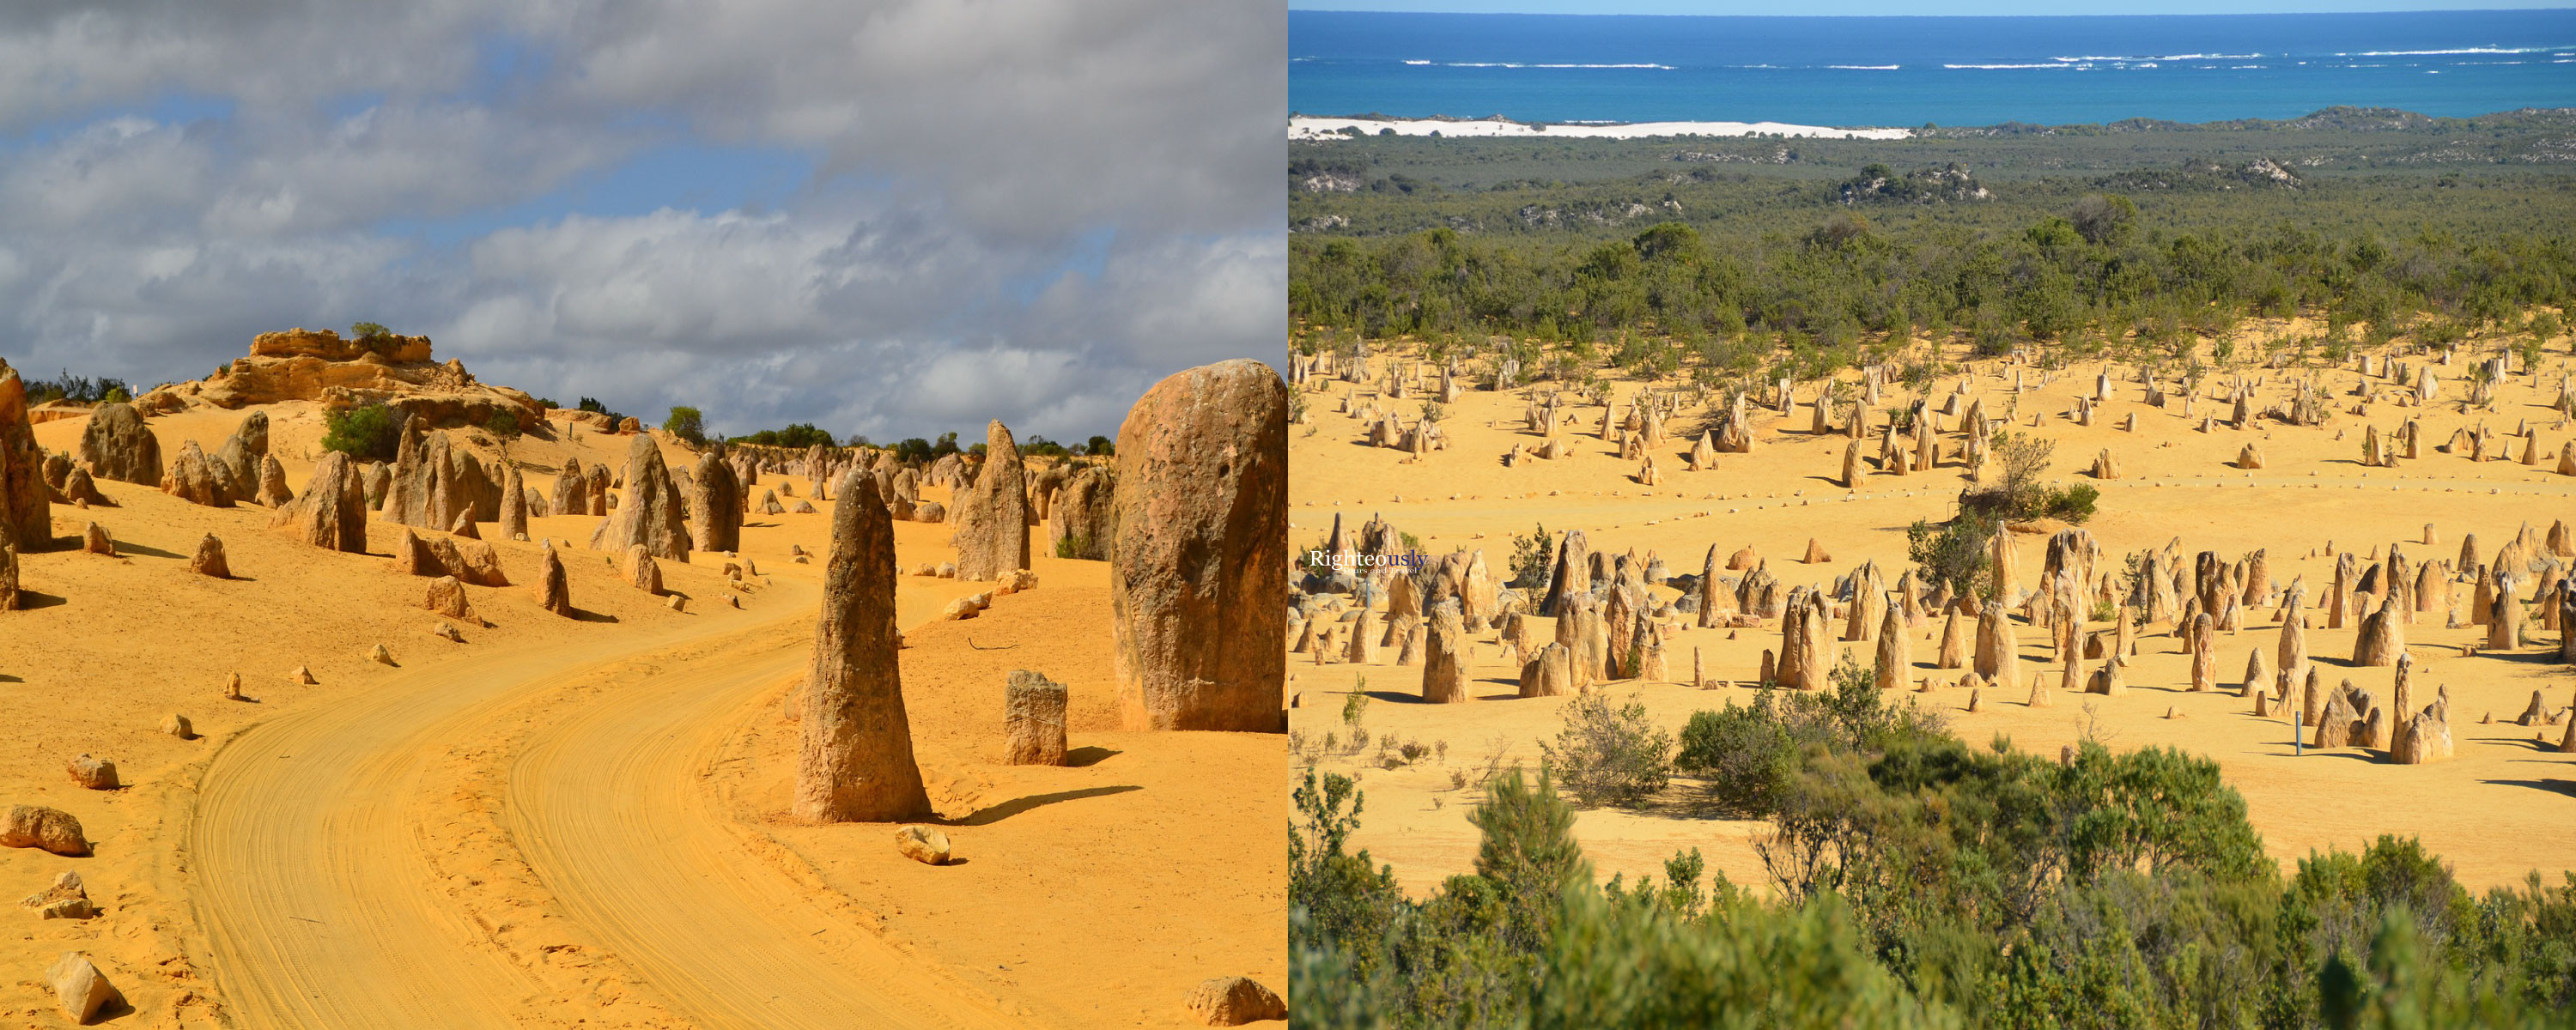 Nambung National Park-national parks in Australia tourist Attractions